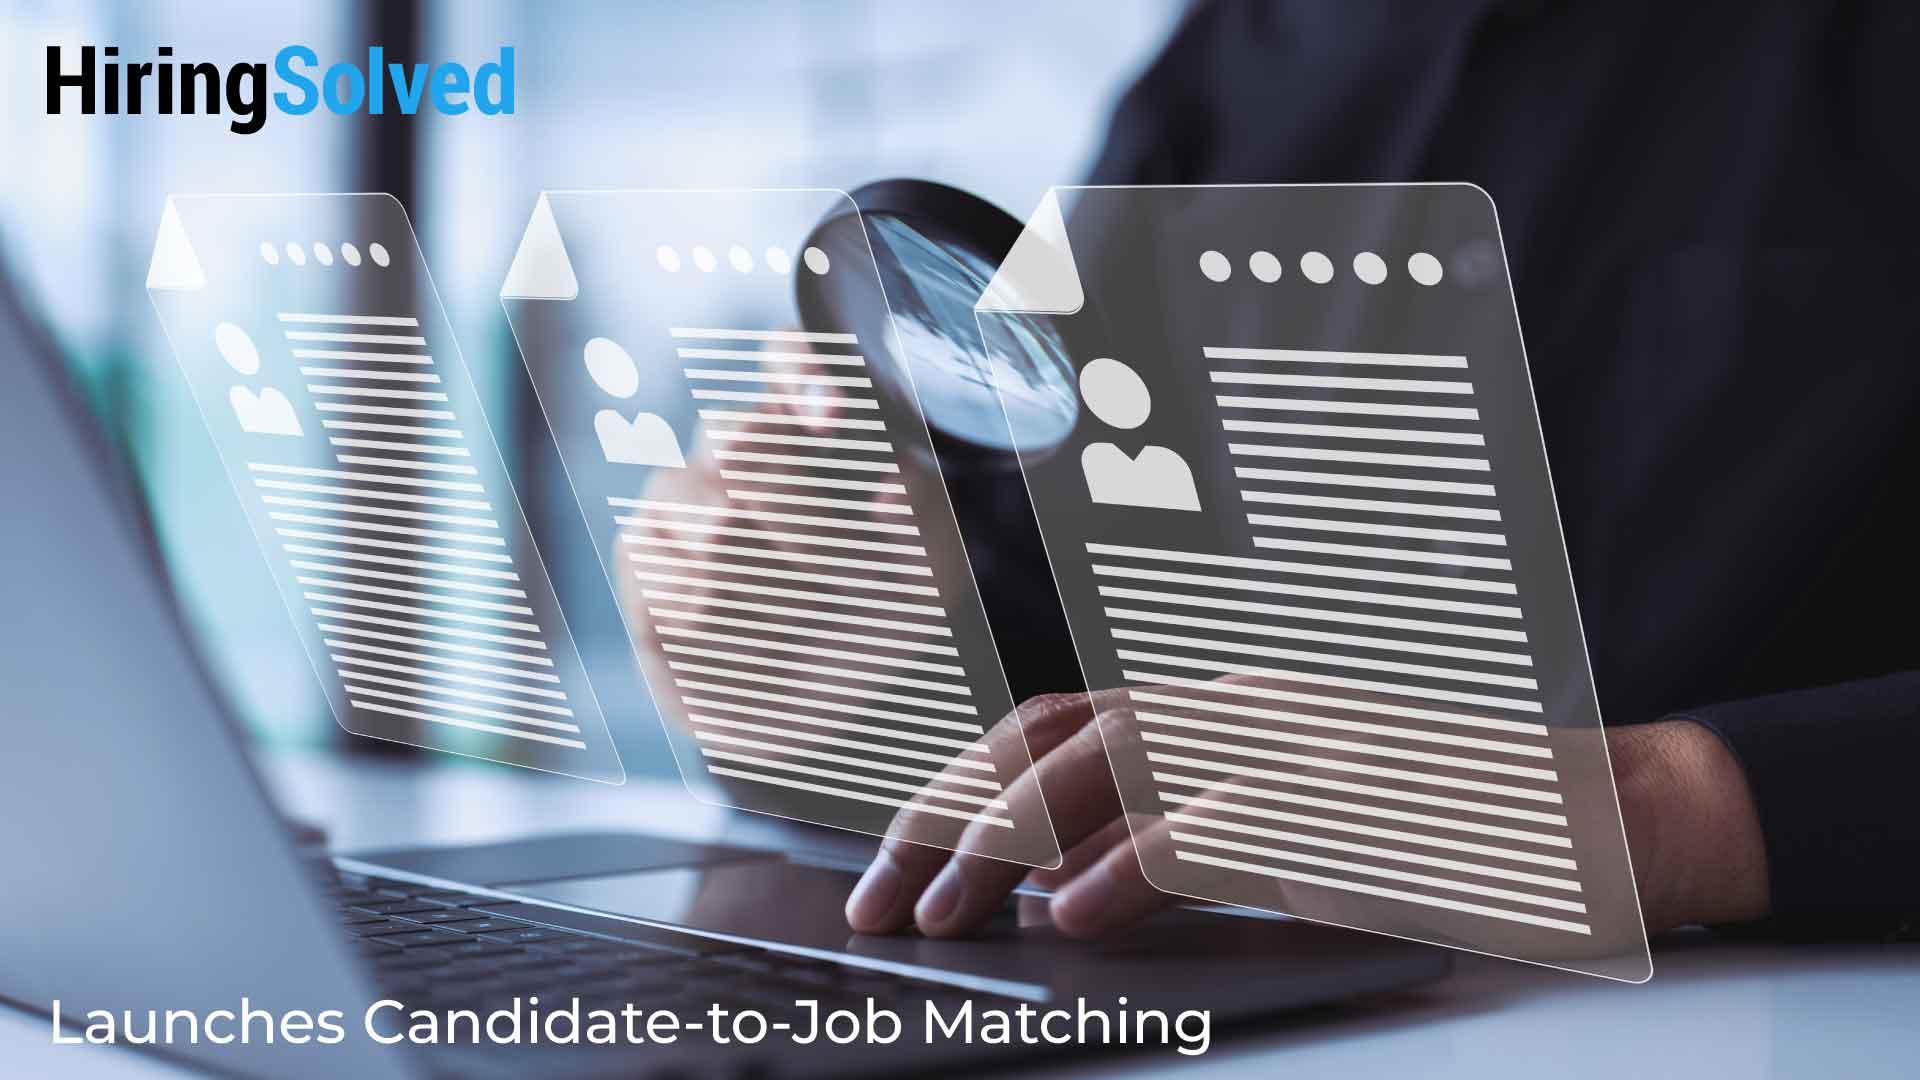 HiringSolved Launches Candidate-to-Job Matching to Enhance Hiring Outcomes